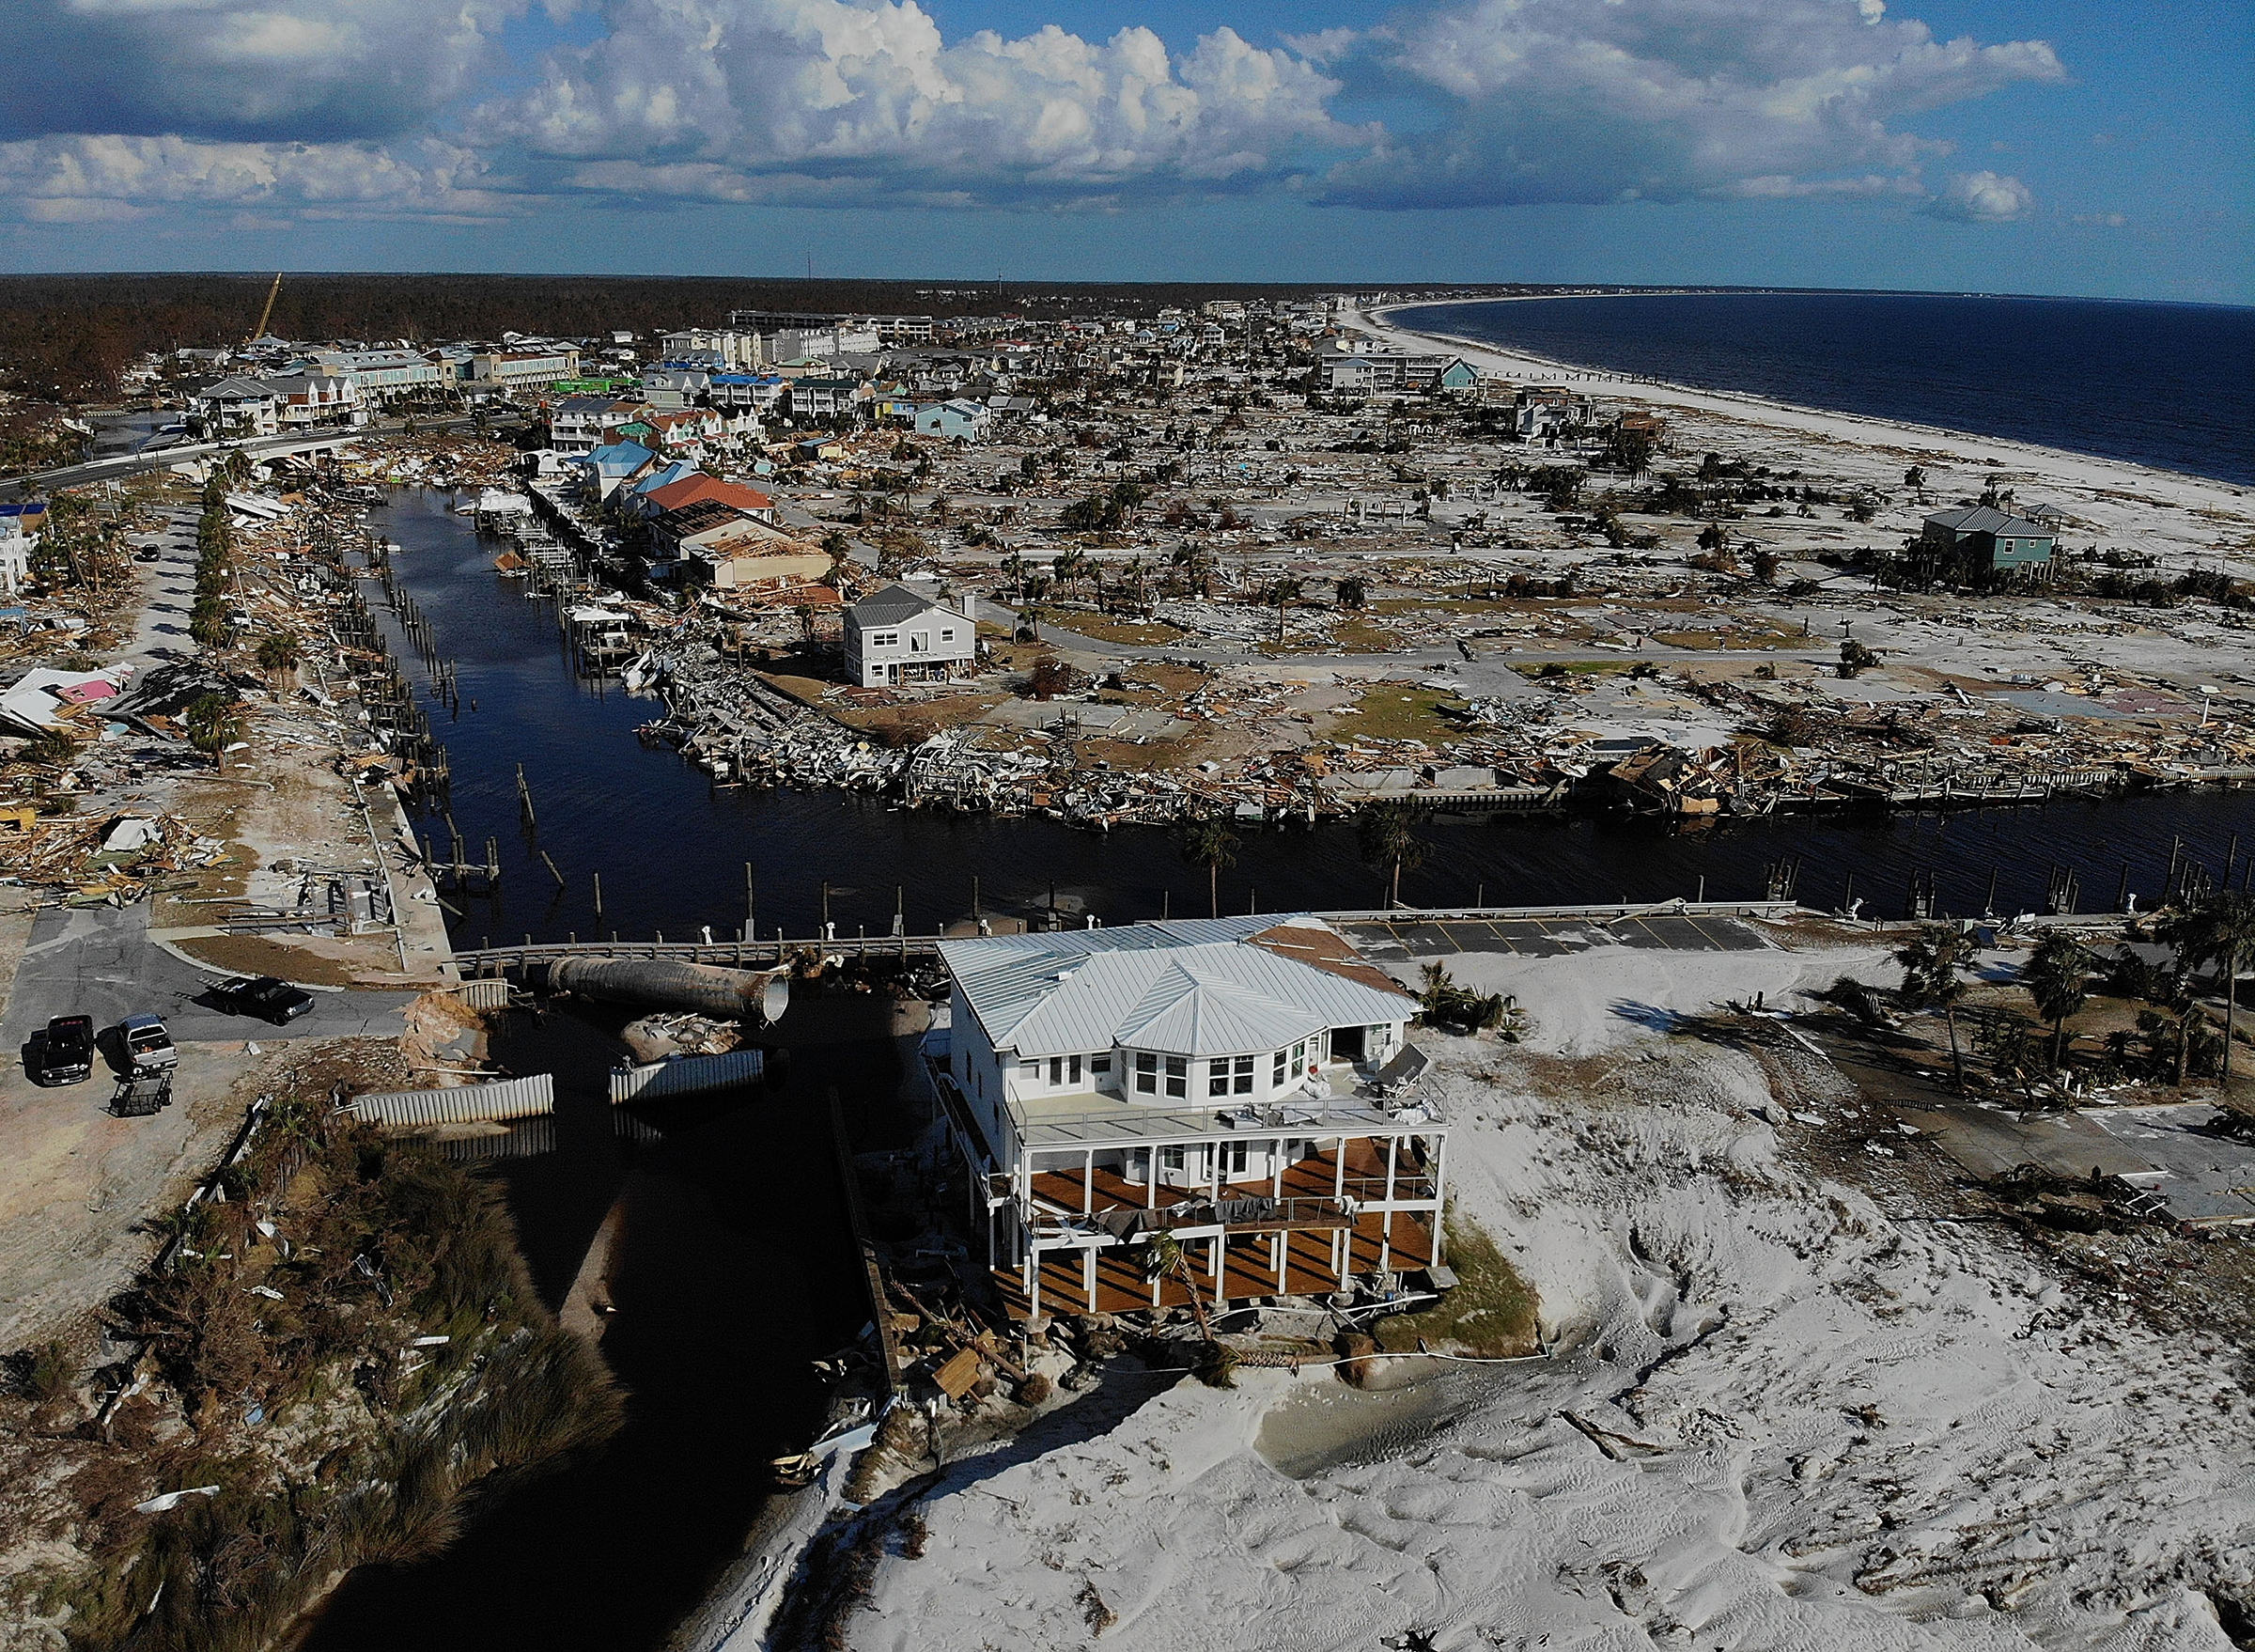 The aftermath of Hurricane Michael, which made a catastrophic landfall as a Category 5 hurricane near Mexico Beach, Fla., in October 2018.